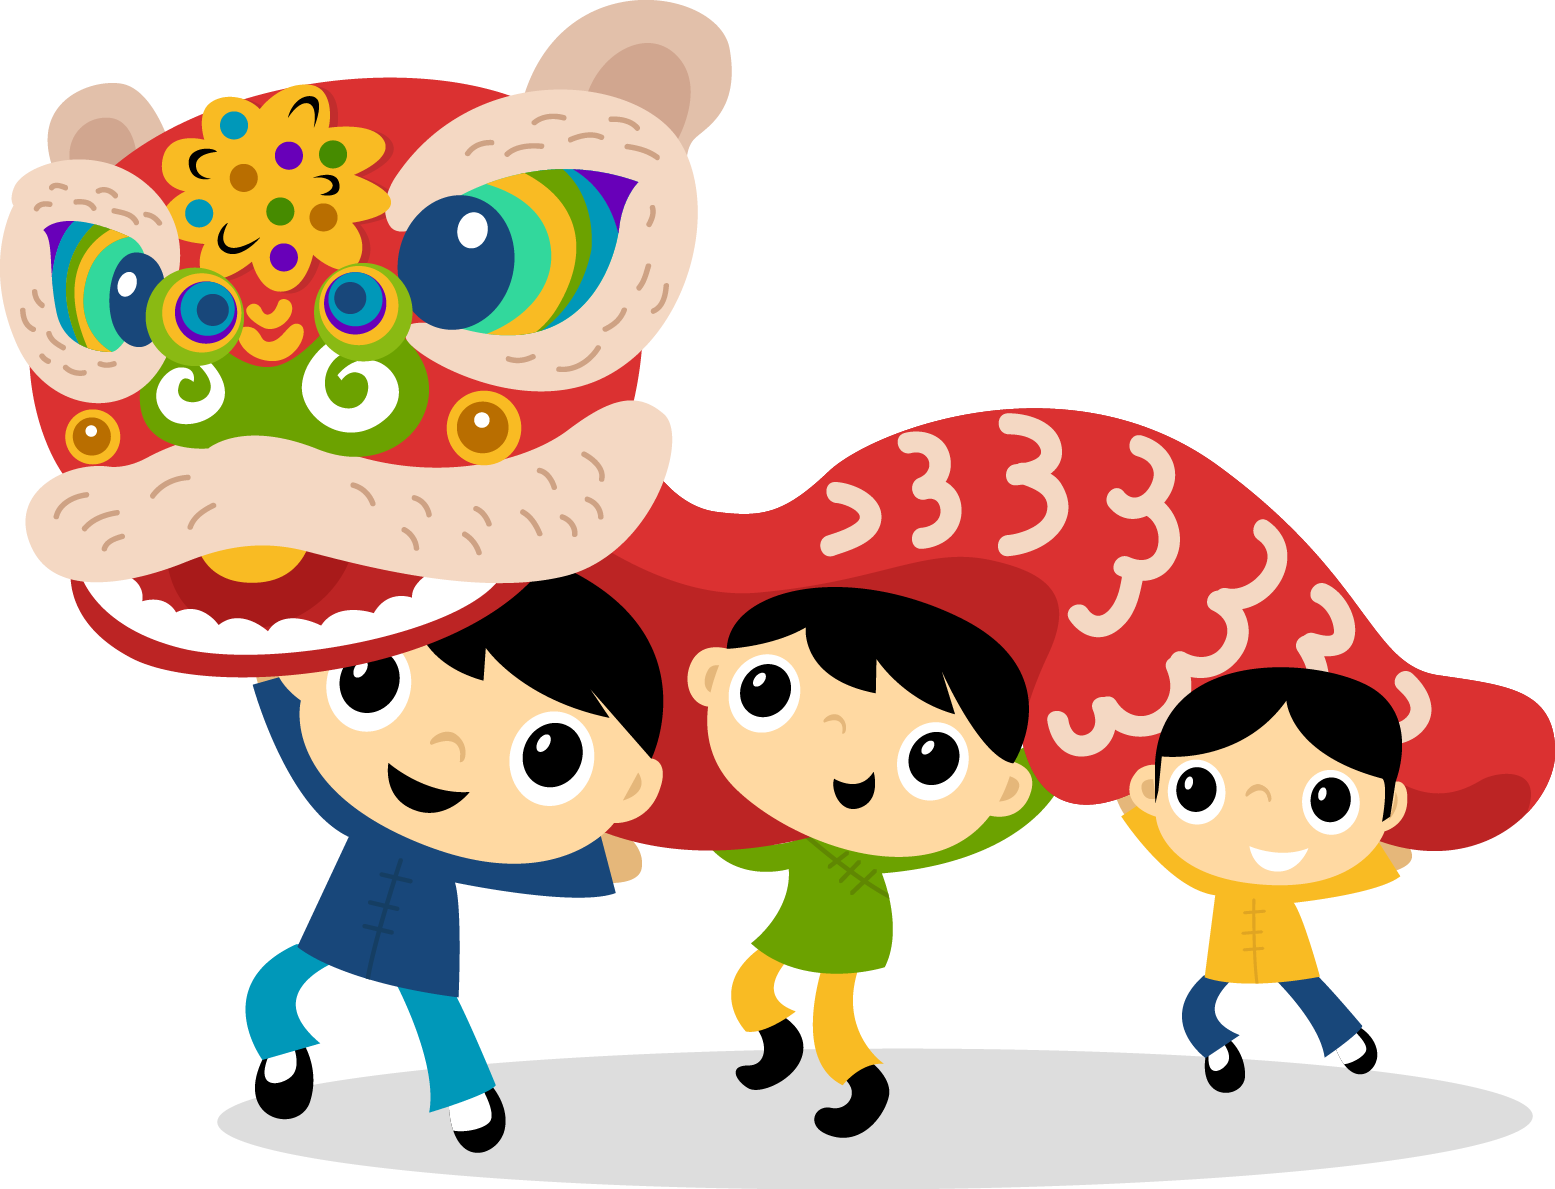 Chinese New Year Lion Dance Cartoon PNG image